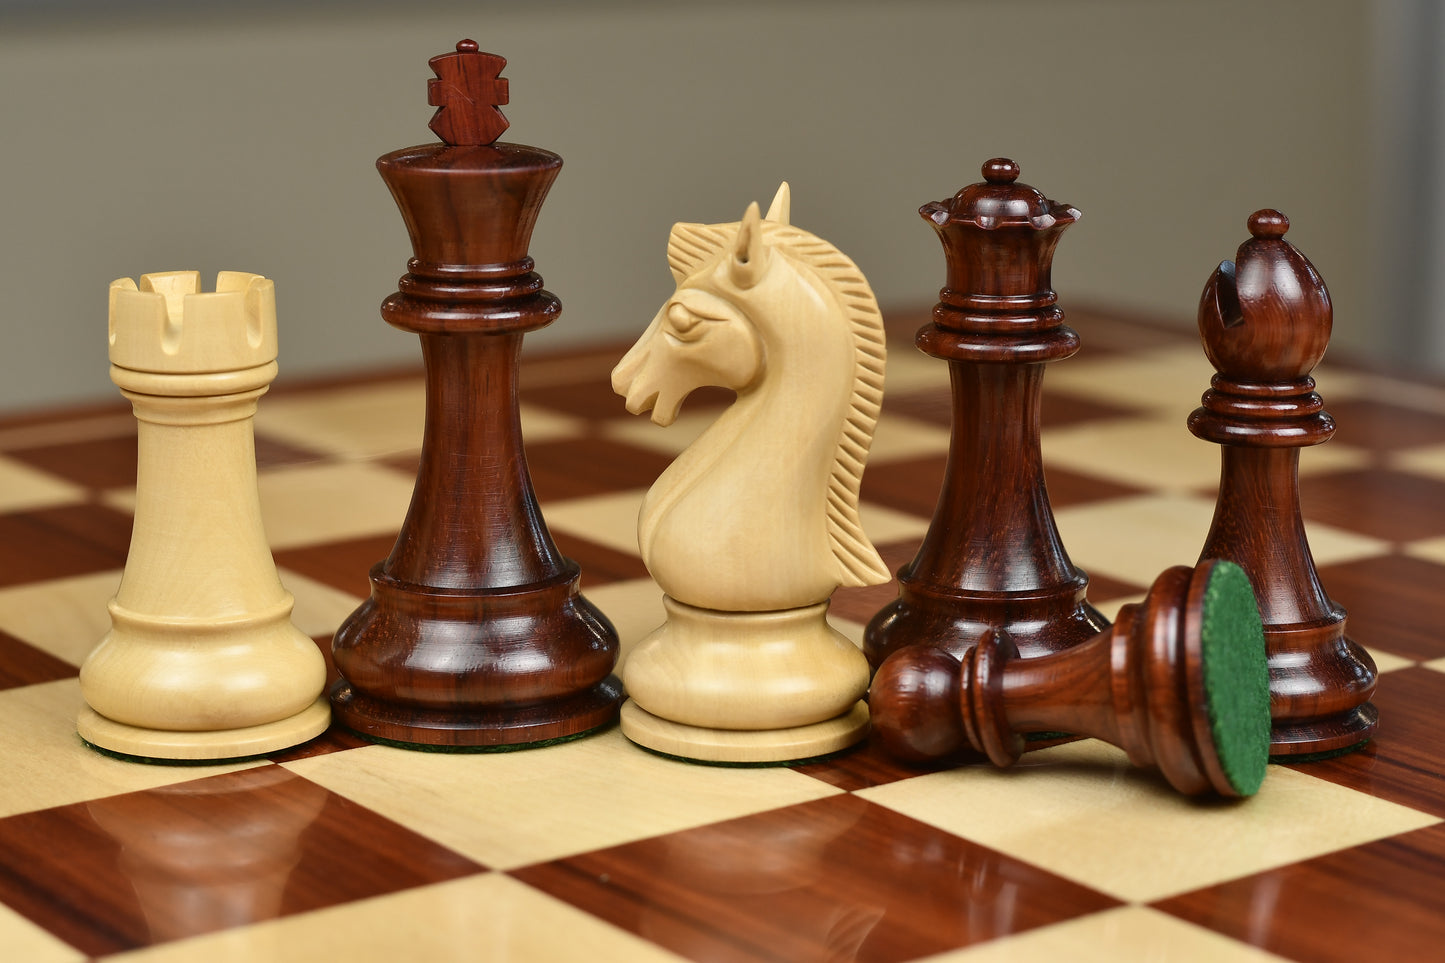 The Candidates Series Staunton Chess Pieces in Bud Rose / Box Wood - 3.75" King